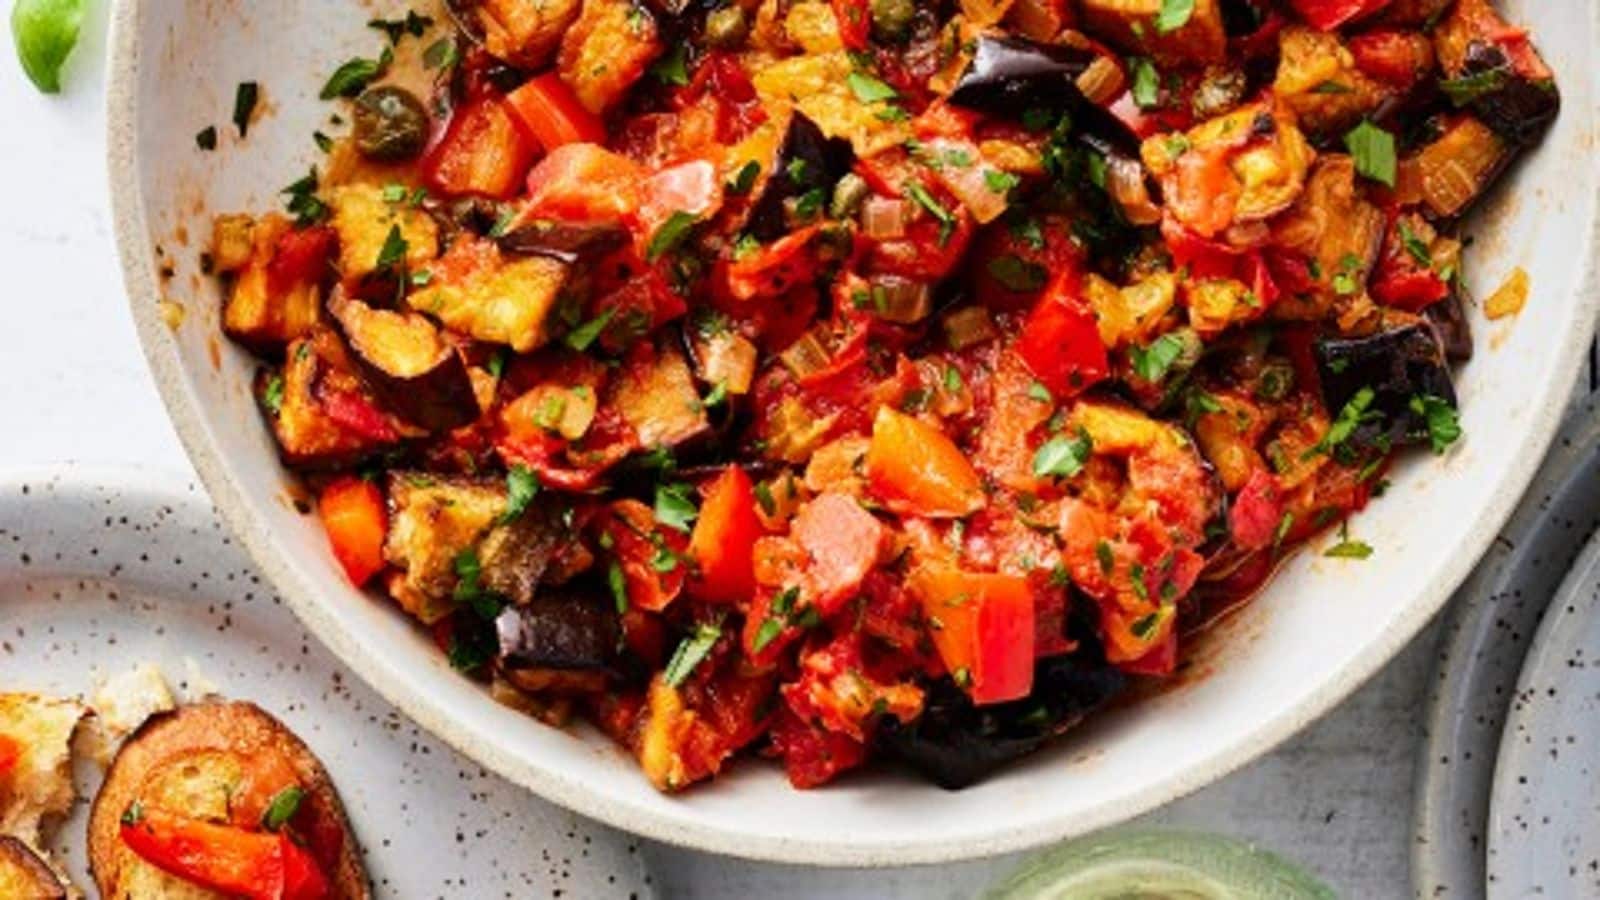 Feeling hungry? Cook this delicious caponata pasta